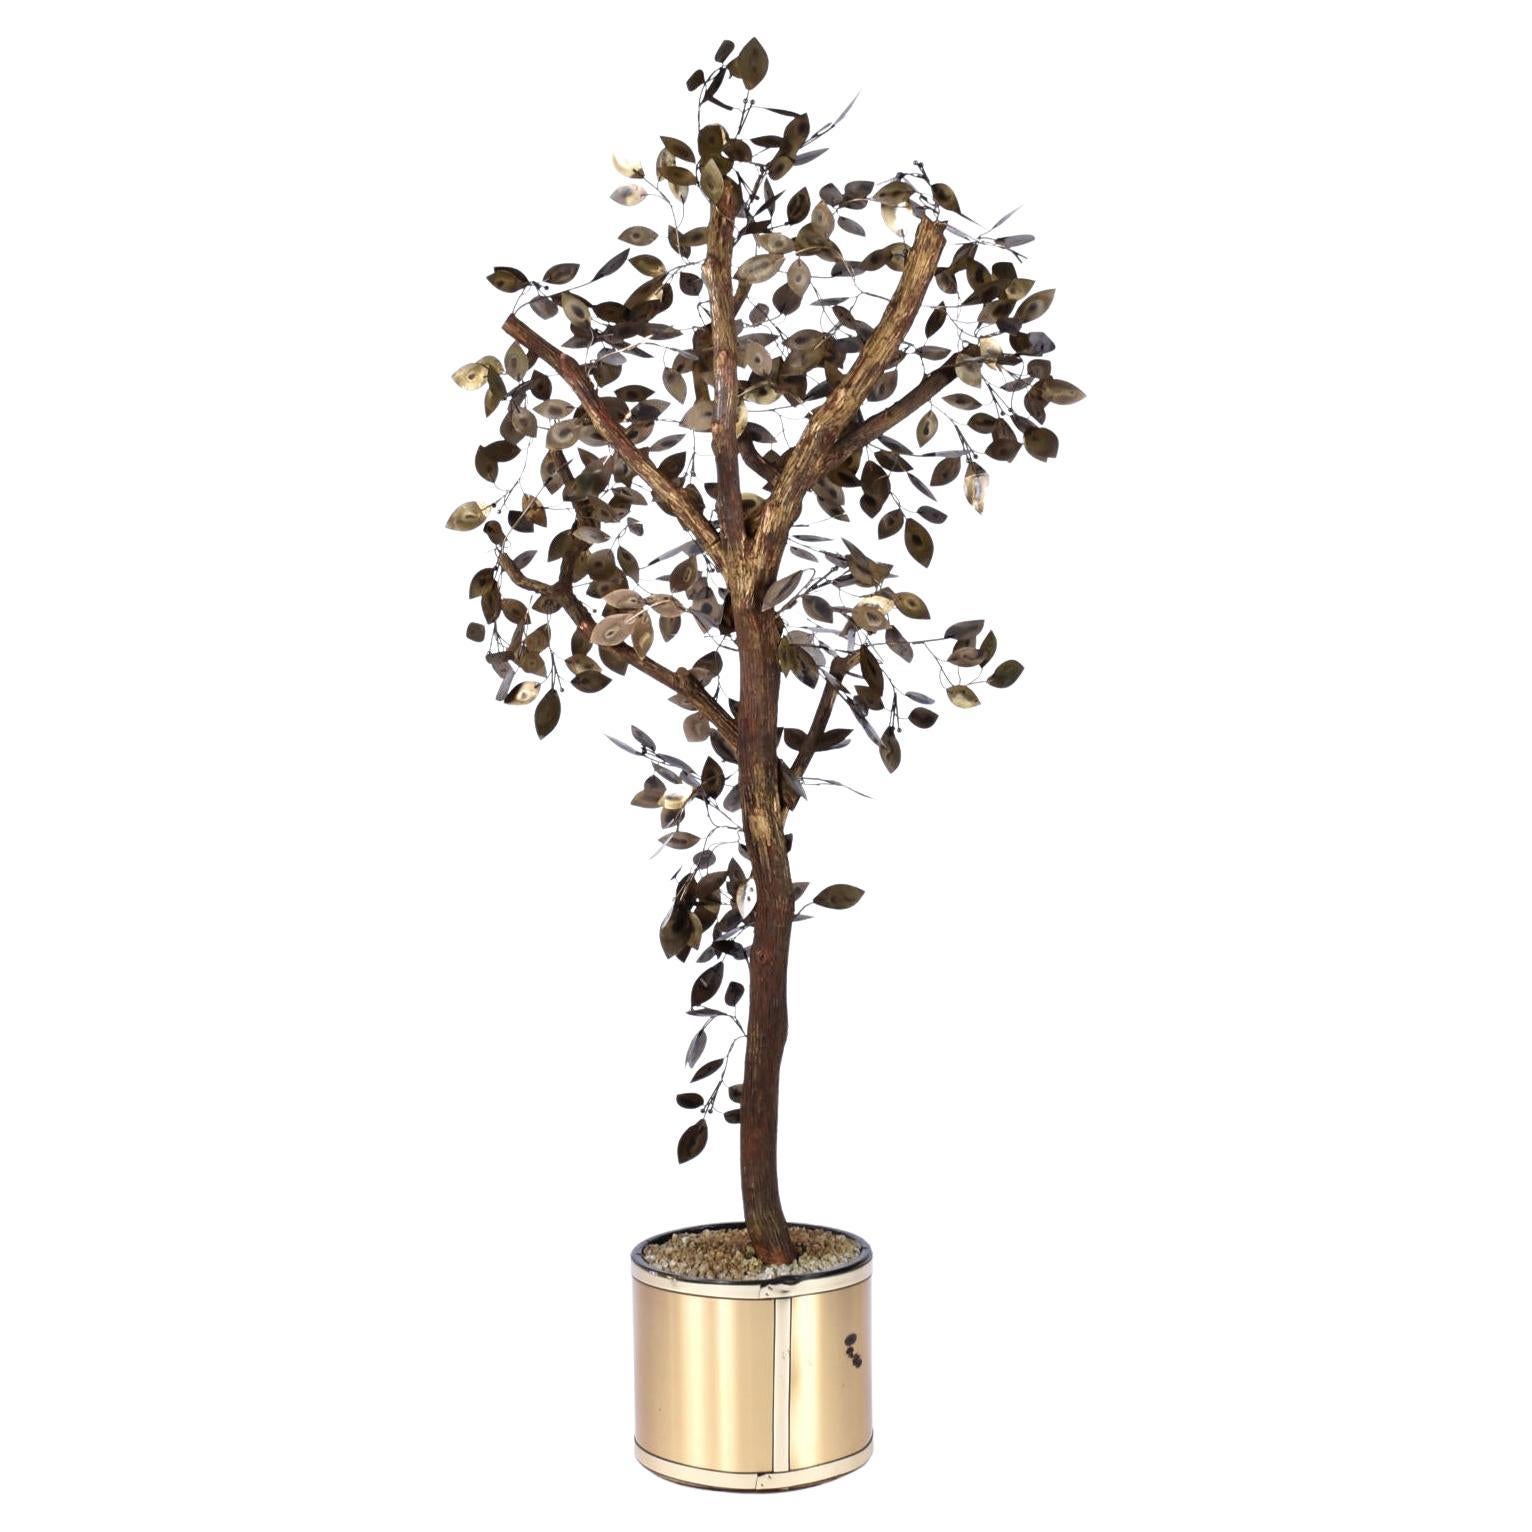 Vintage Curtis Jere Style Patinated Brass Potted Tree Sculpture